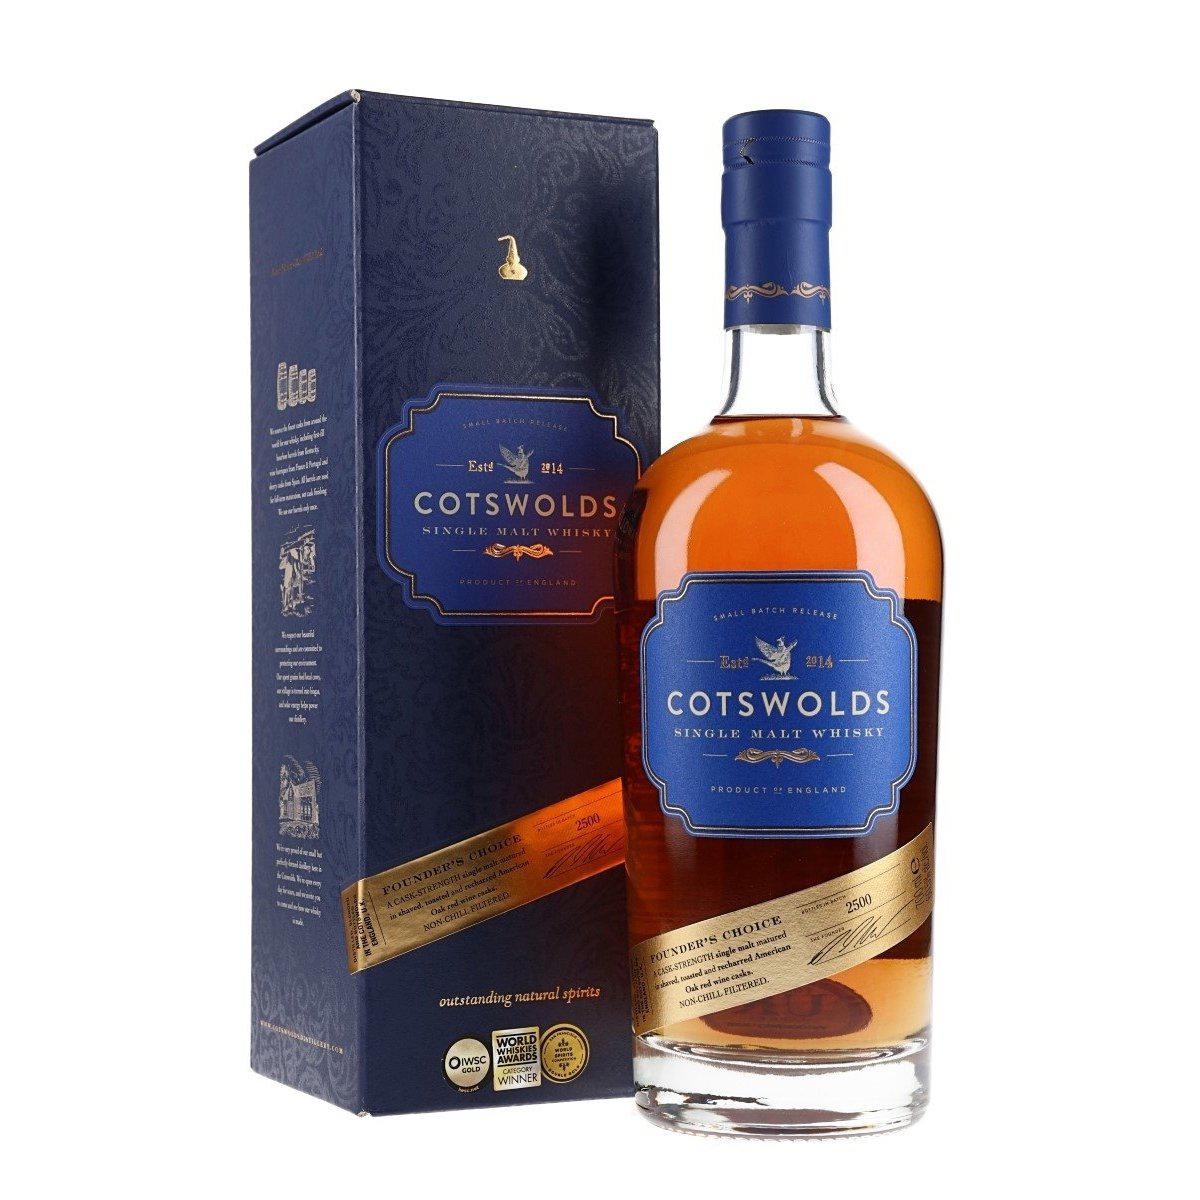 Cotswolds Founder's Choice Cask Strength English Single Malt Whisky 700ml